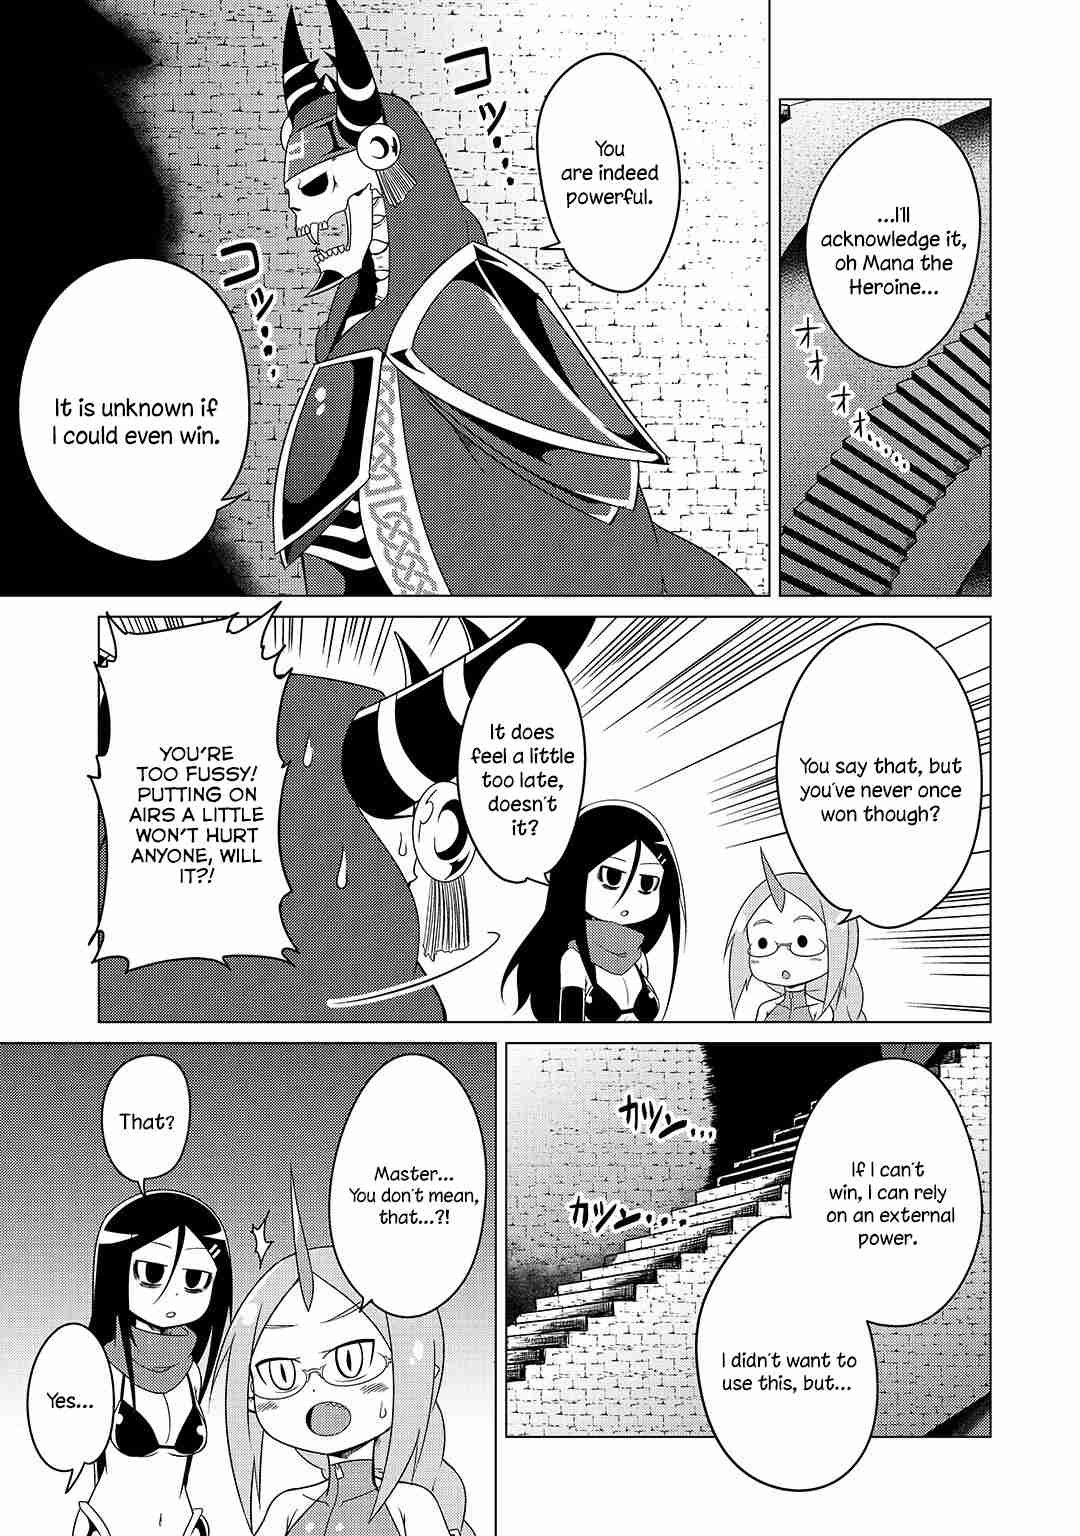 The Devil Is Troubled by the Suicidal Heroine Vol. 2 Ch. 8 The devil unseals the evil god!